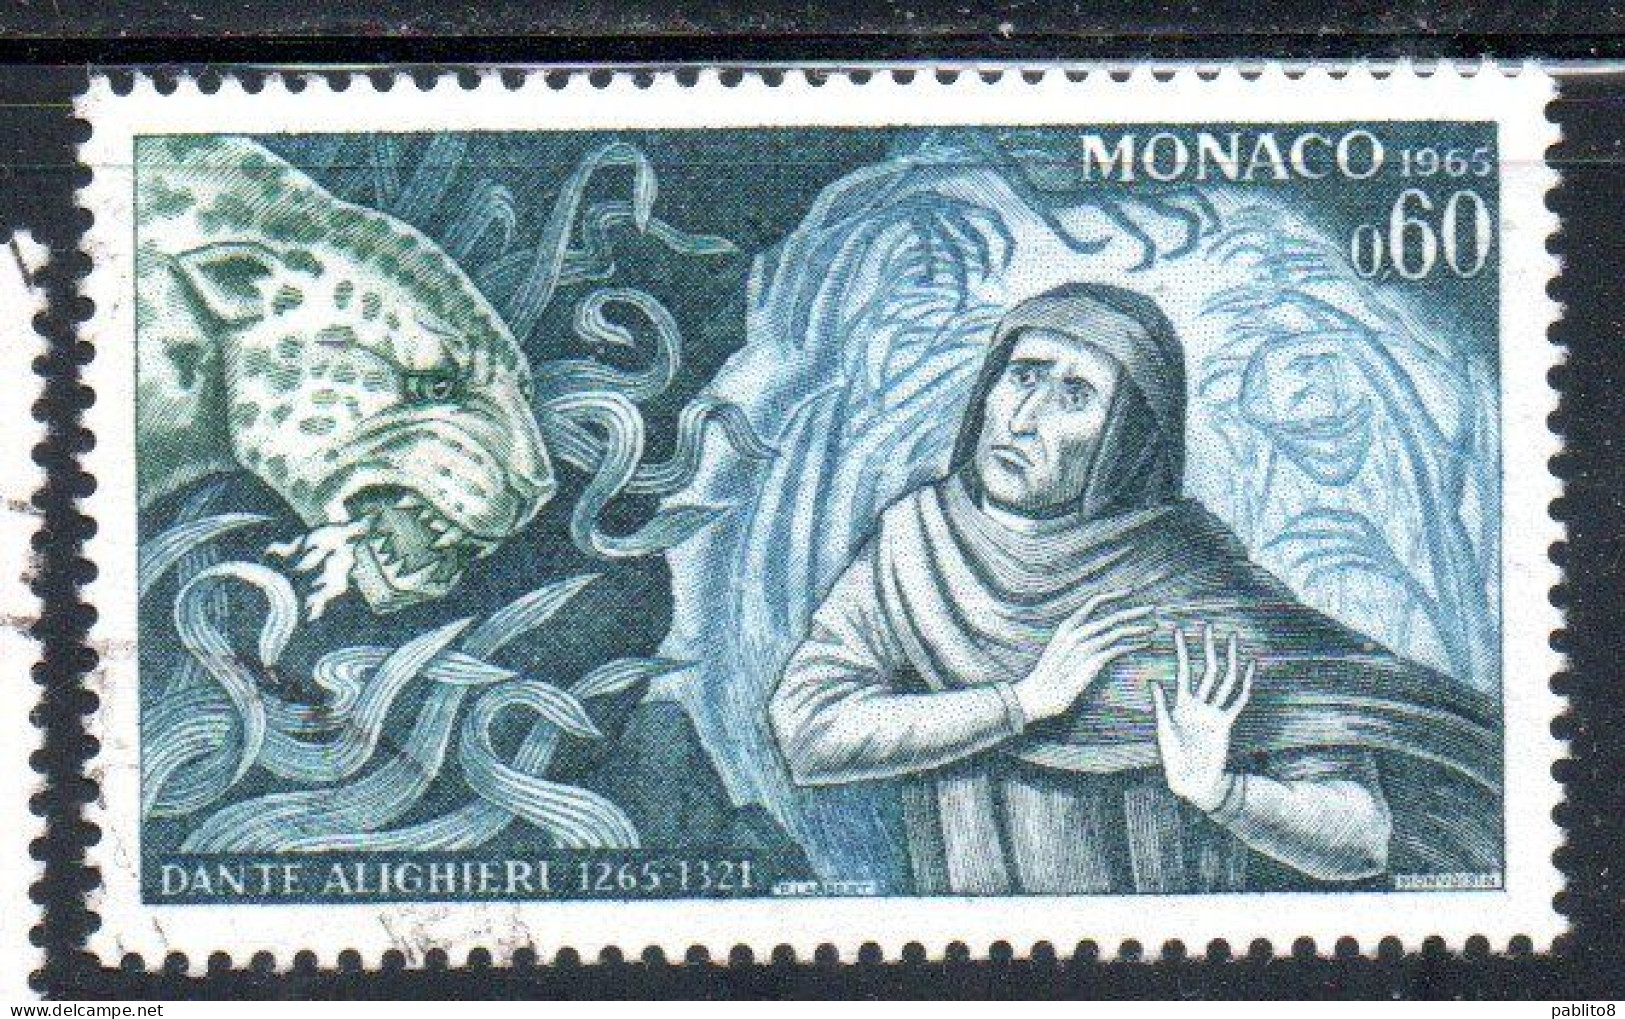 MONACO 1966 DANTE ALIGHIERI 700th ANNIVERSARY BIRTH FACING PANTHER OF ENVY 60c USED USATO OBLITERE' - Used Stamps